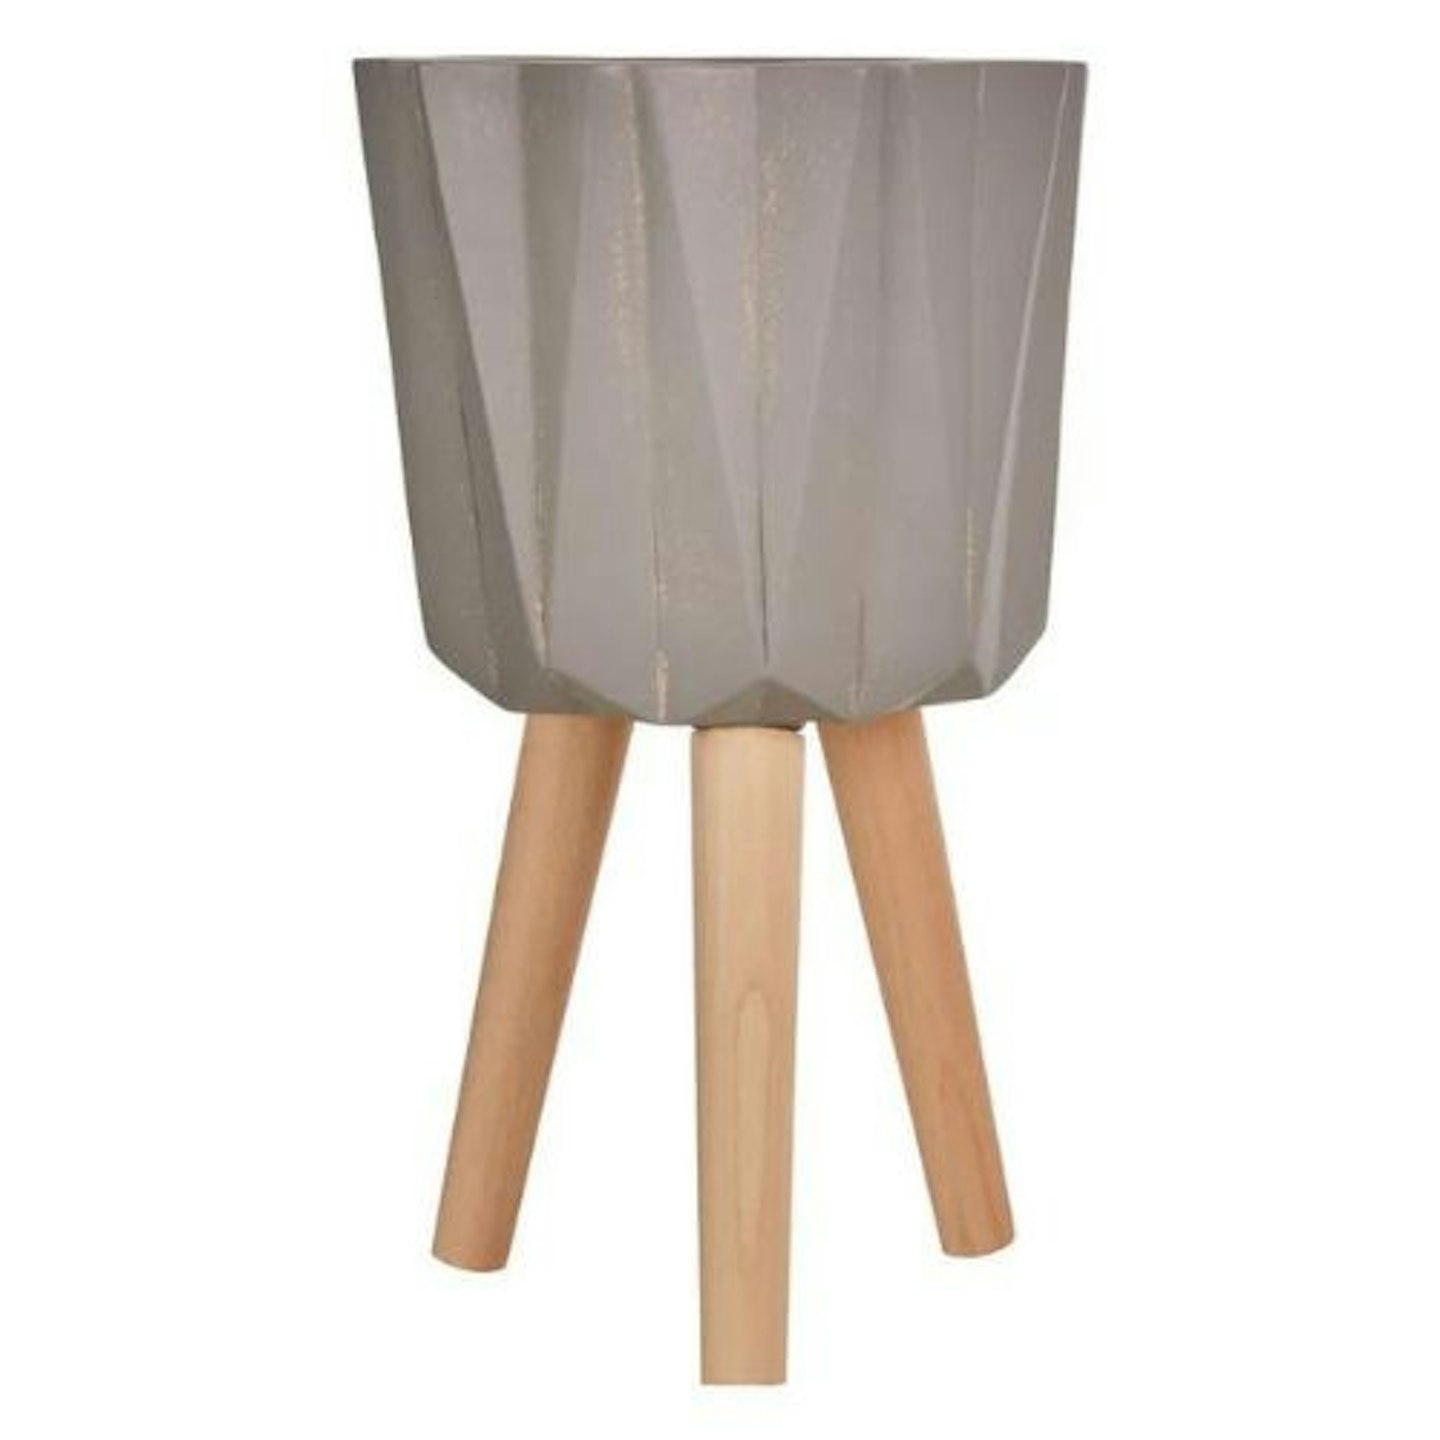 51cm Multi-Faceted Planter in Grey Finish with Beech Wood Legs